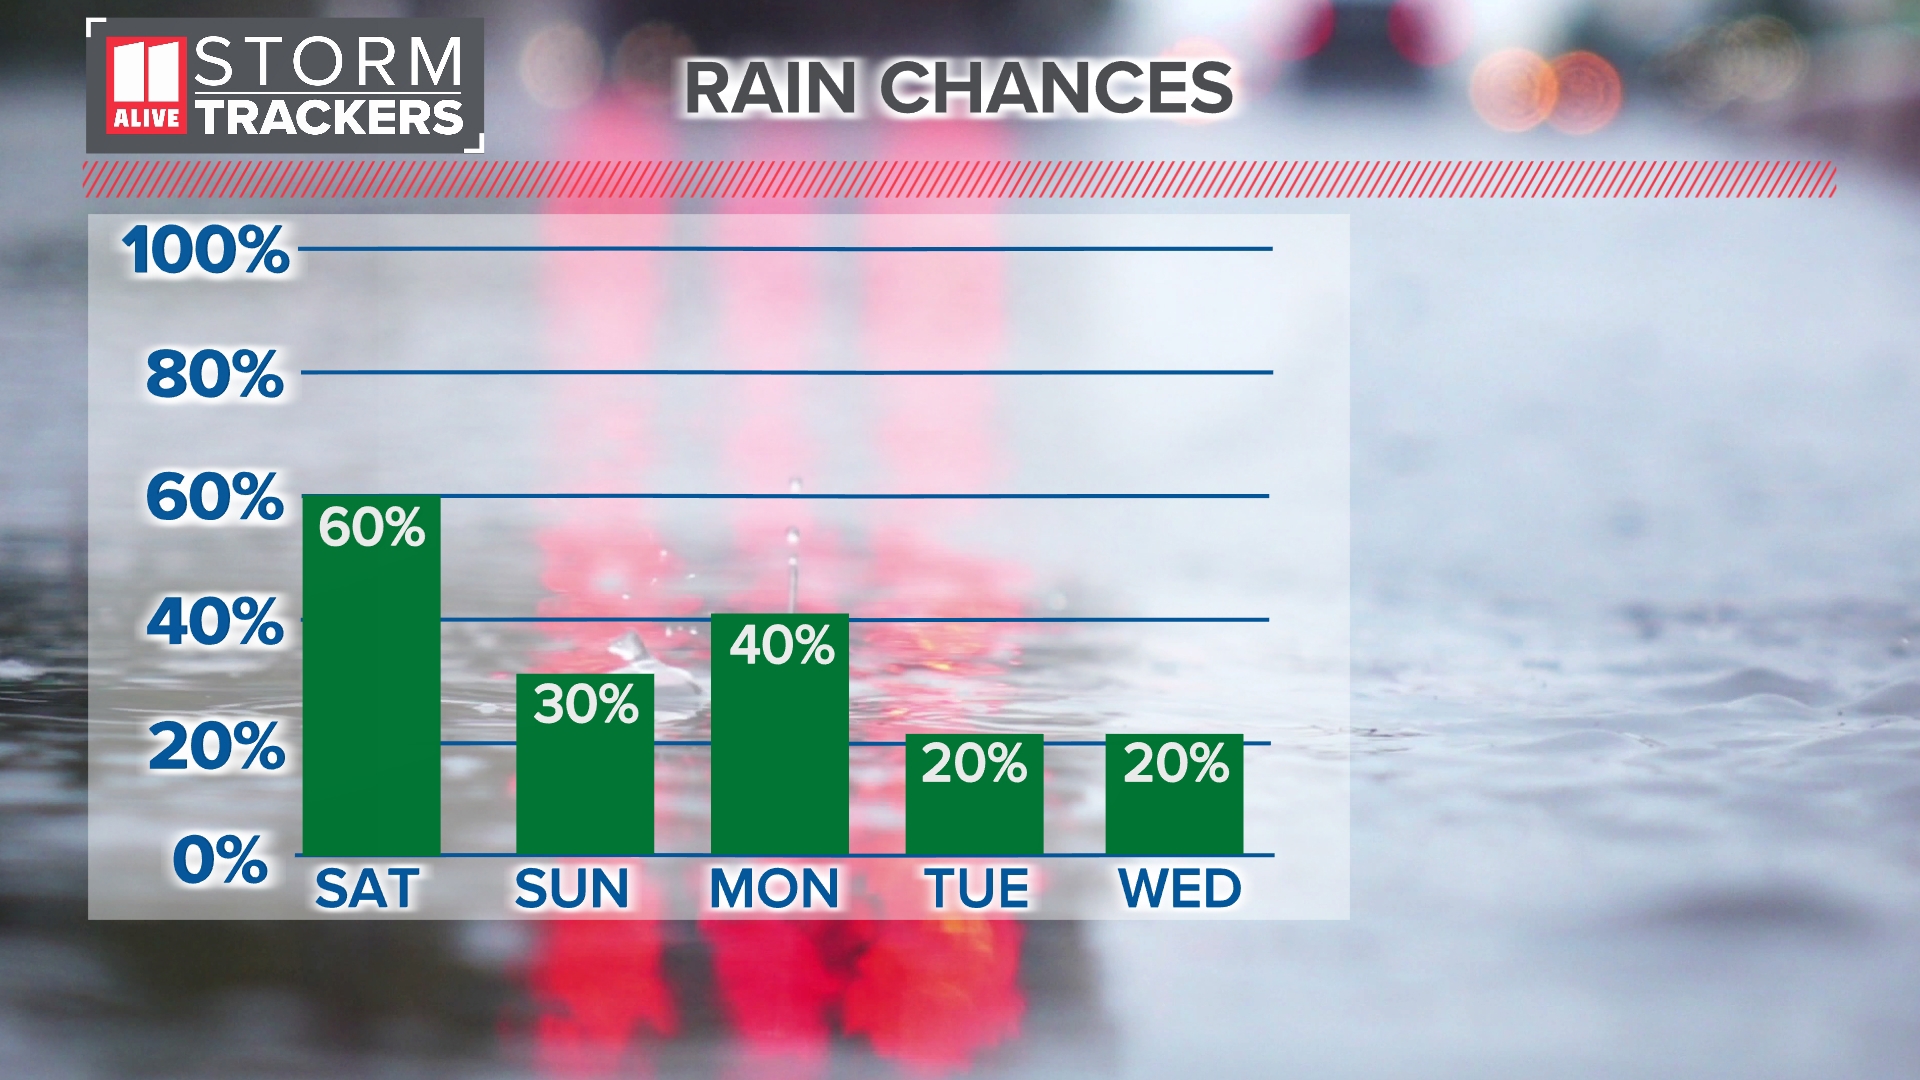 Rain chances for the weekend